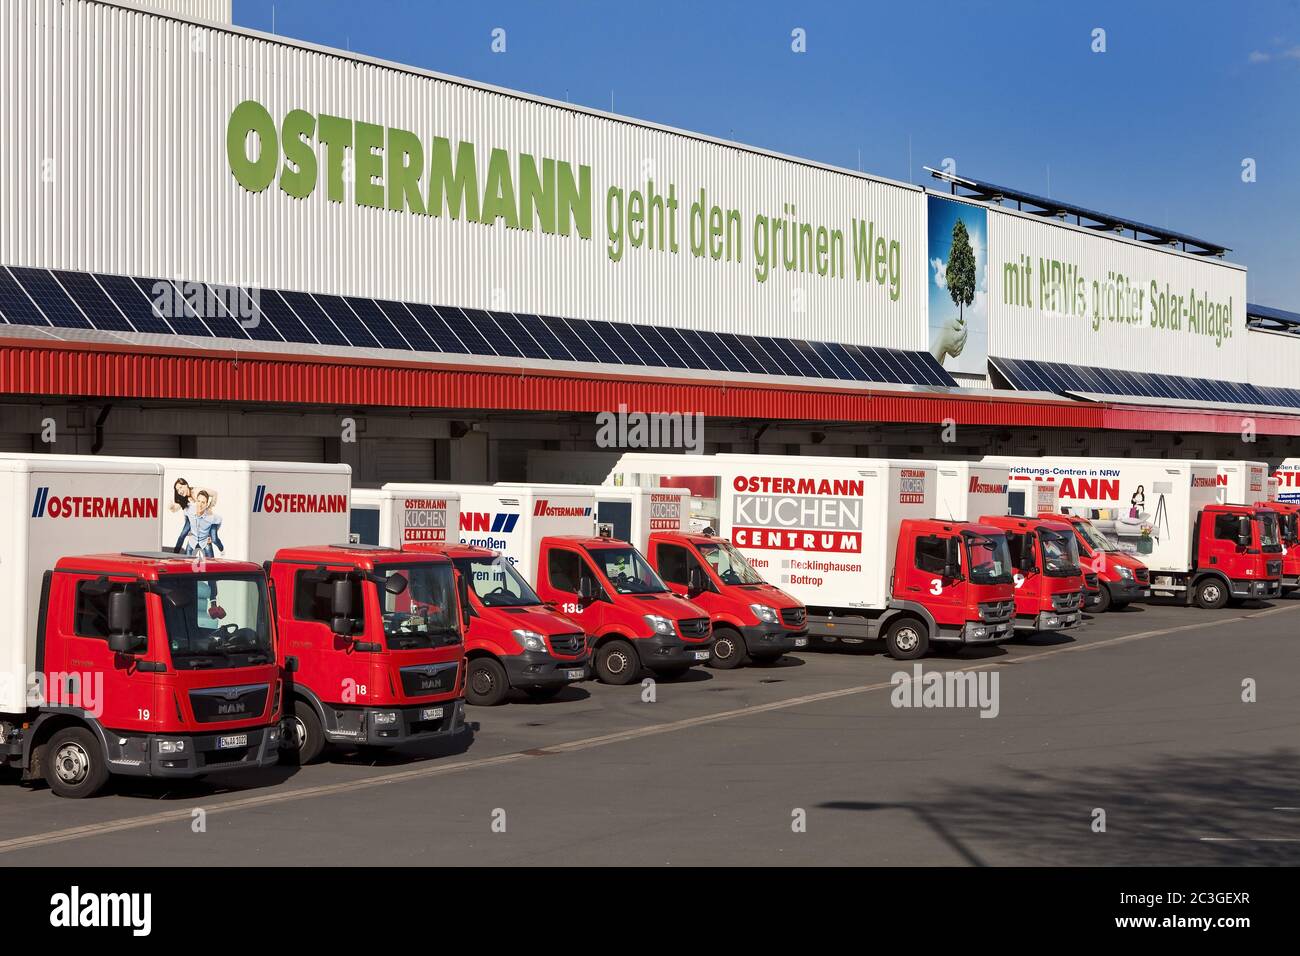 furniture shop Ostermann, all delivery vehicles stand still, shutdown, Witten, Germany, Europe Stock Photo